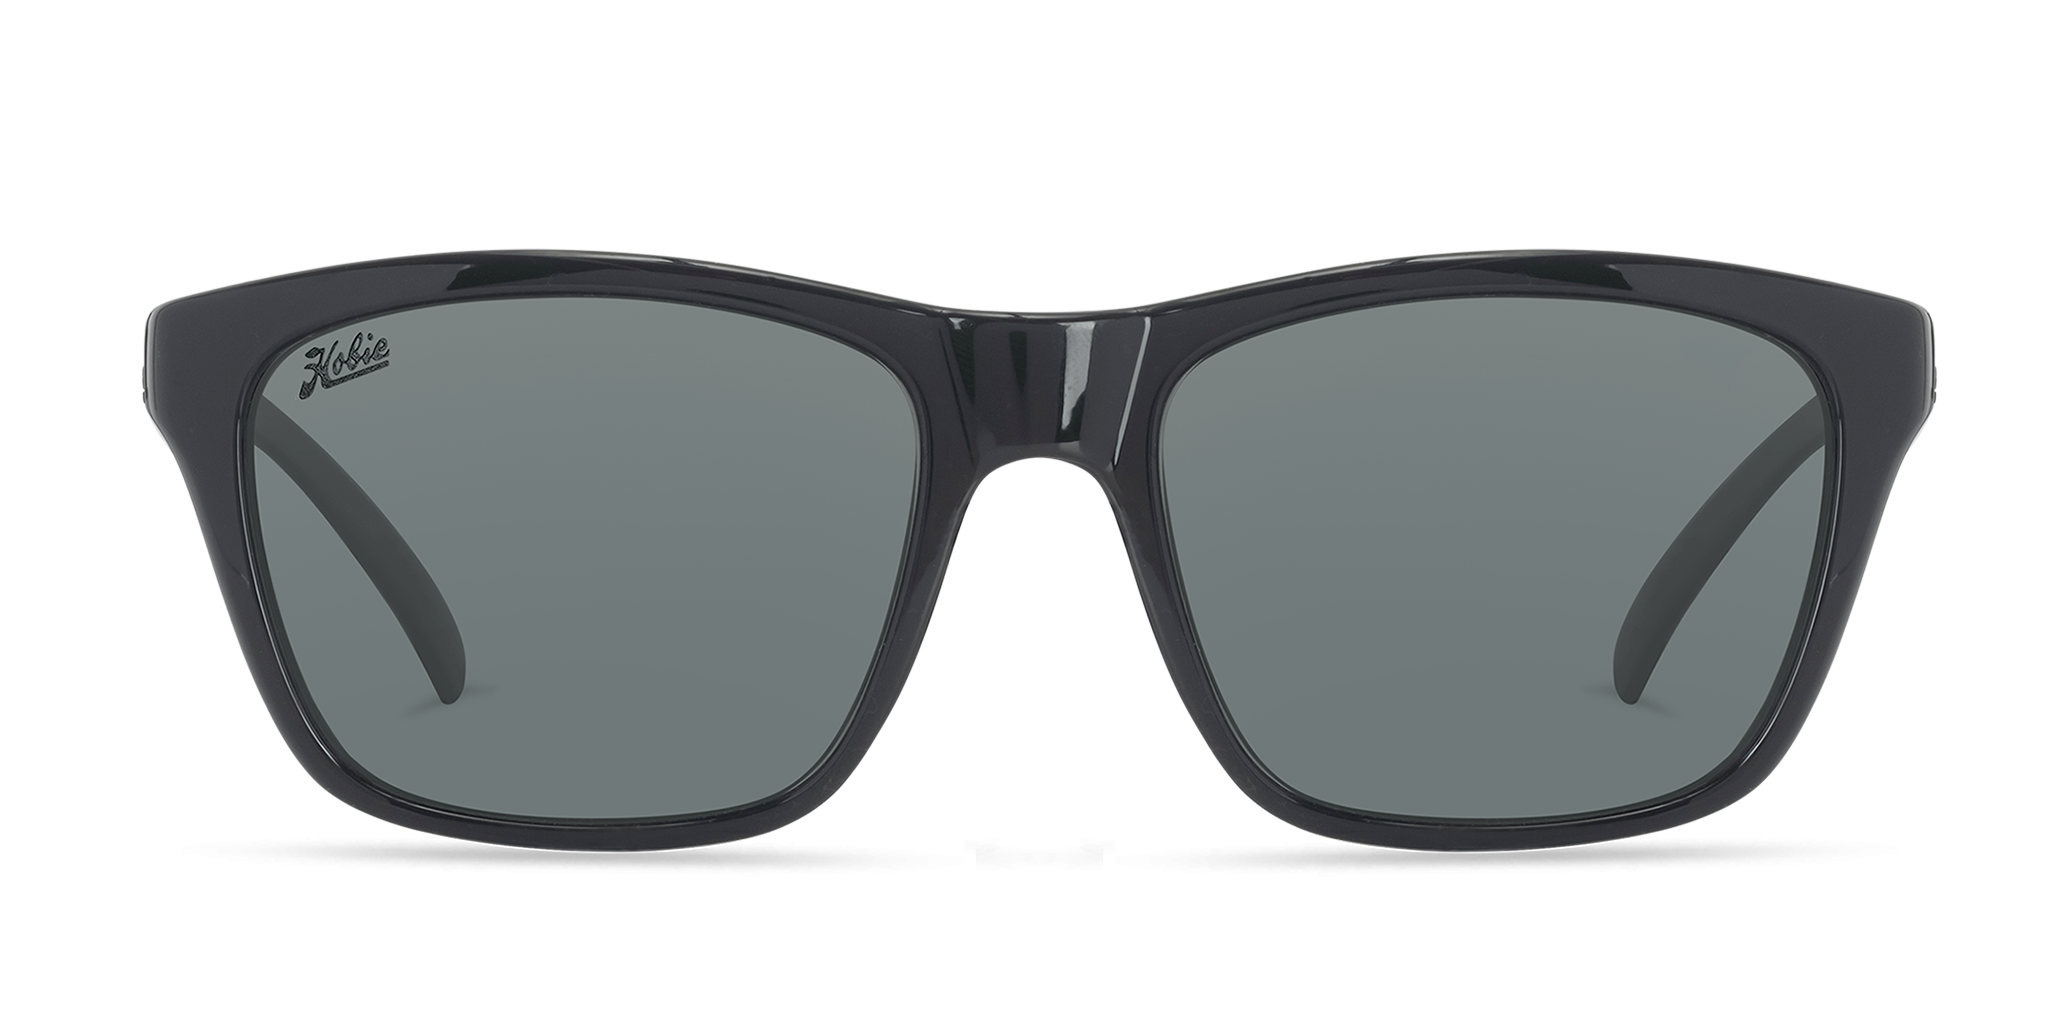 What is a a good pair of polarized glasses. ($30-$50) : r